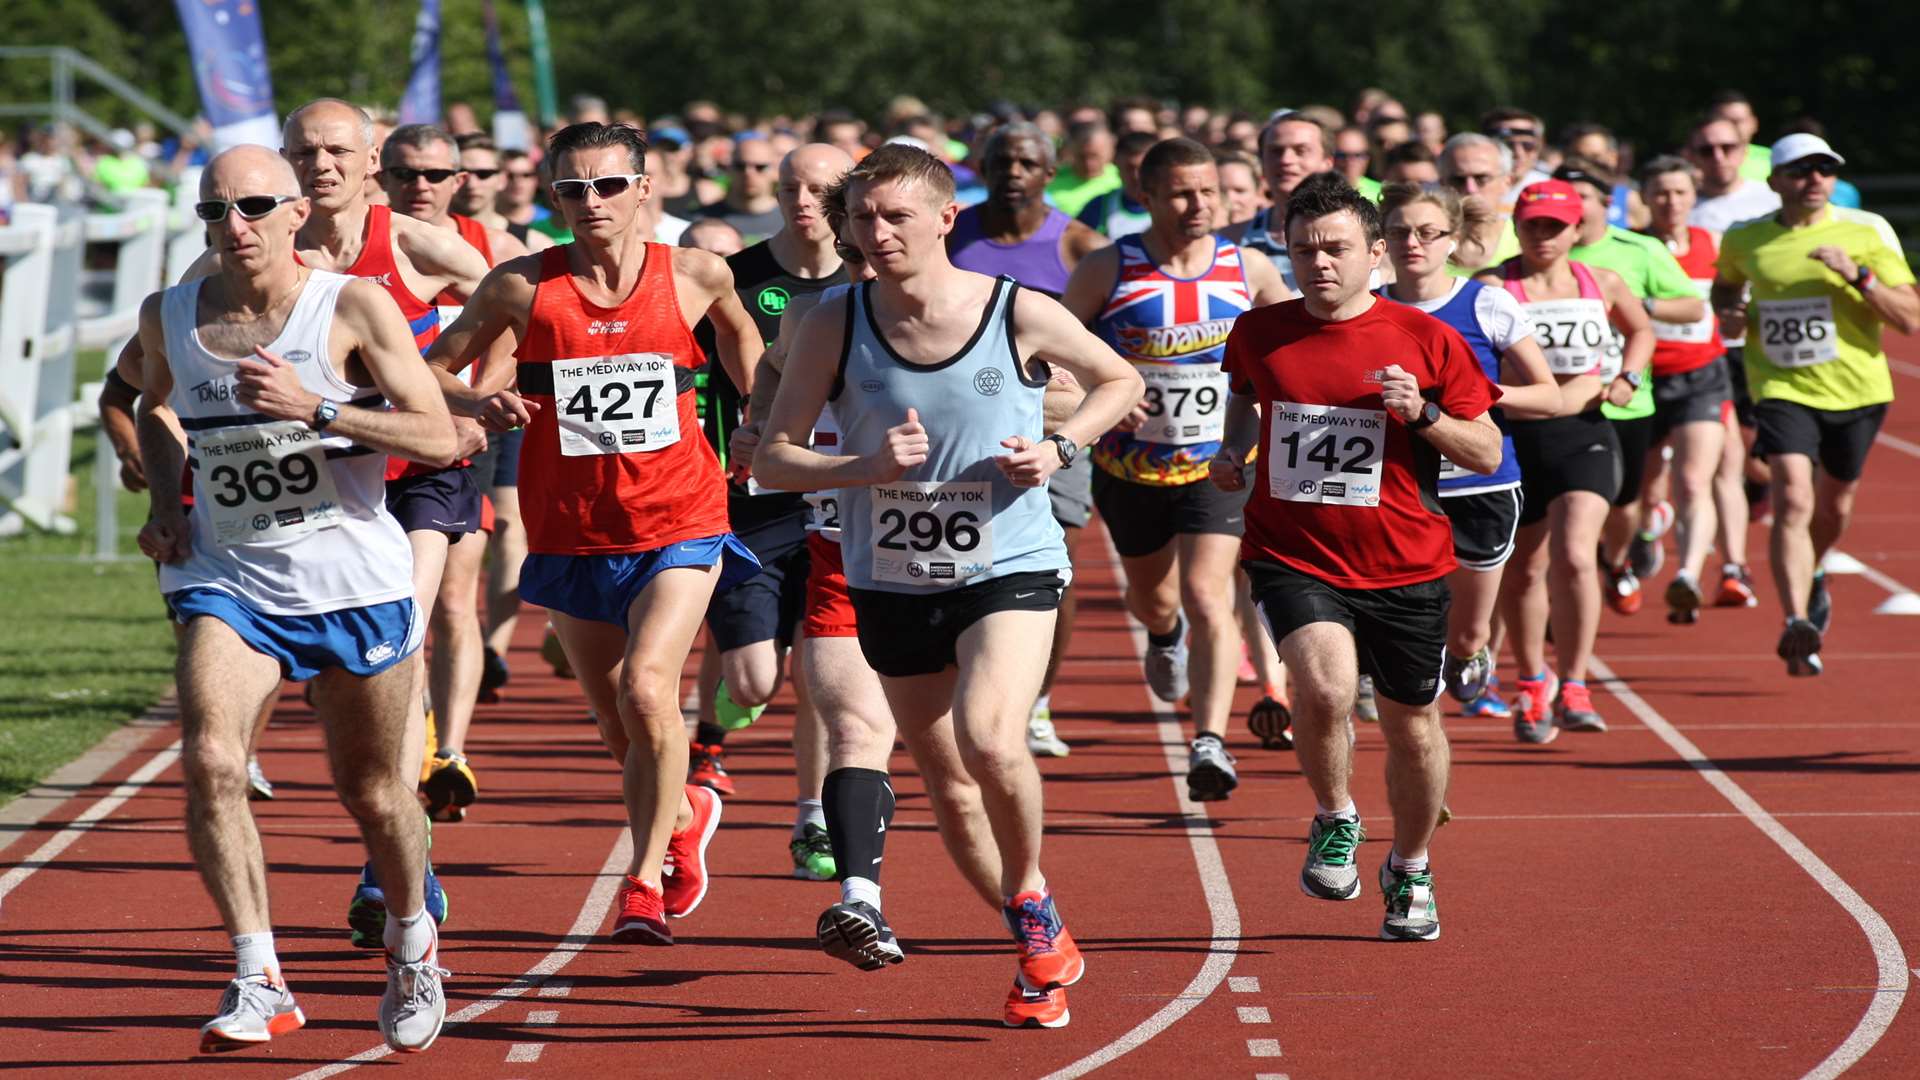 This year's Medway 10k gets under way Picture: John Westhrop